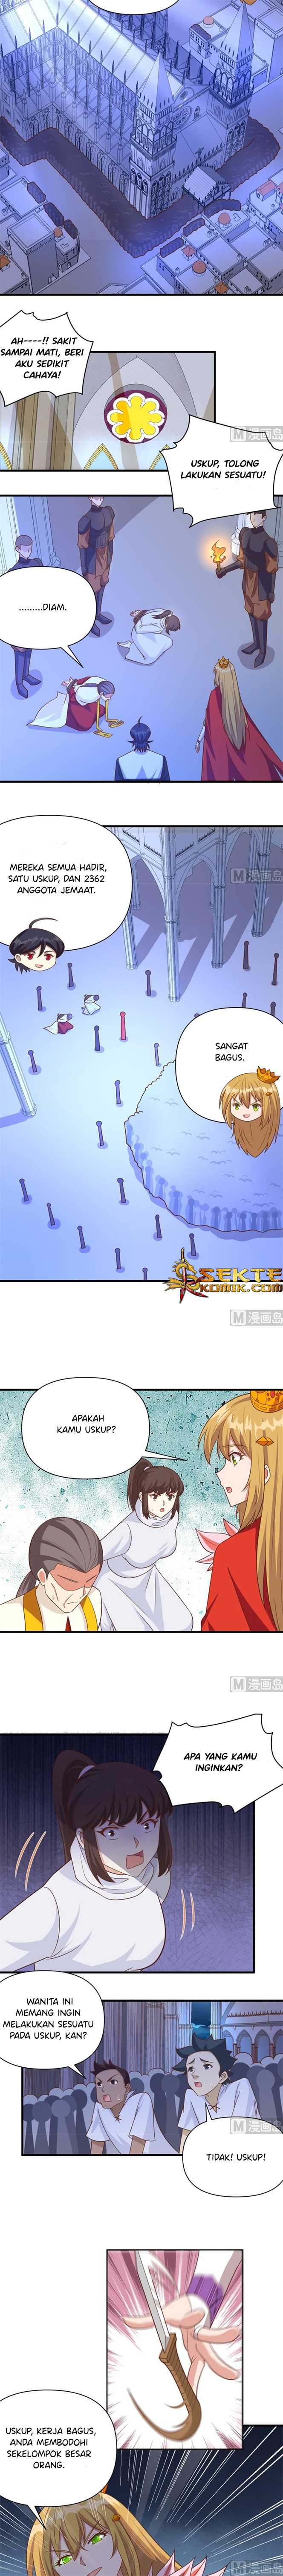 To Be The Castellan King Chapter 358